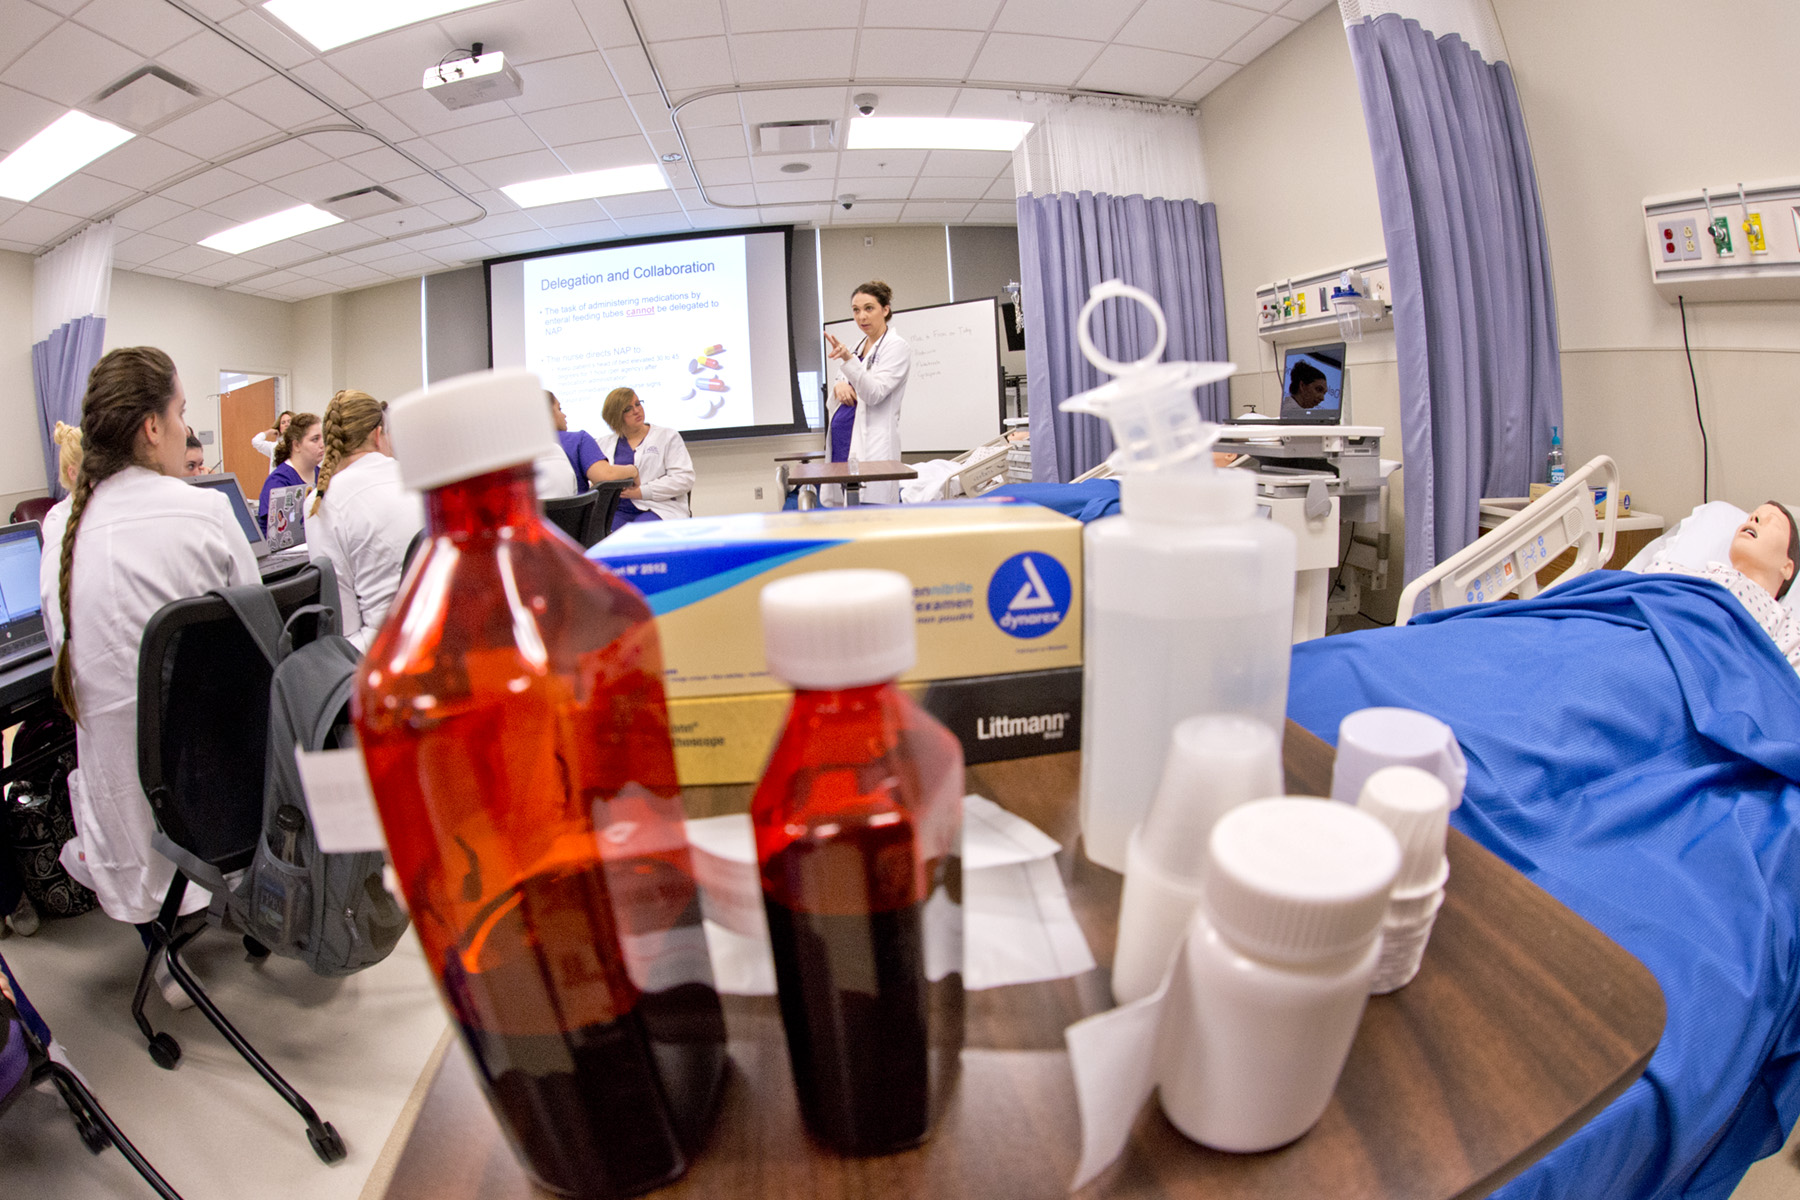 Students in white coats listen to a female professor in front of a projector in a nursing simulation lab surrounded by medical equipment and prescription bottles